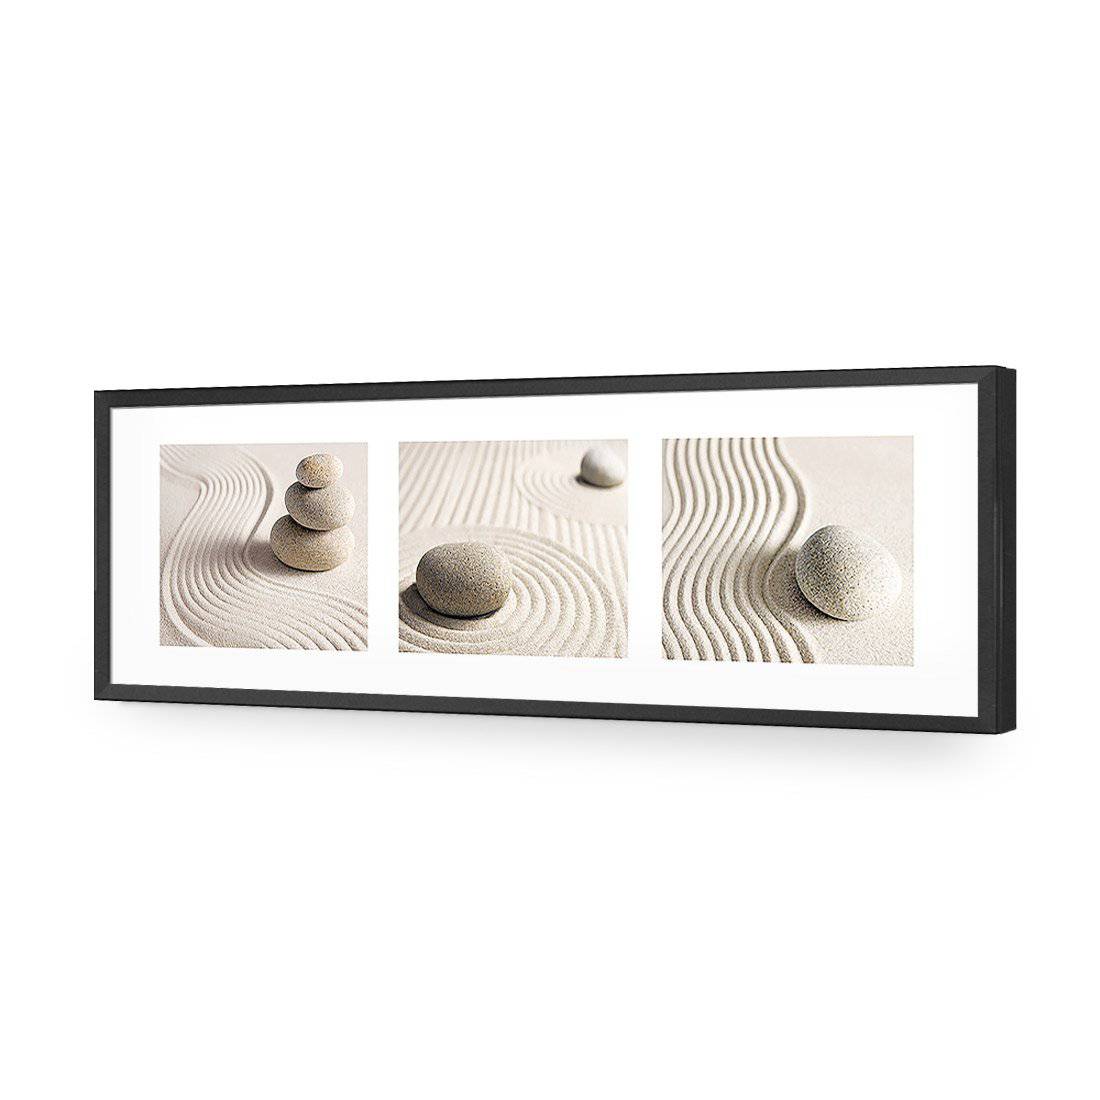 Sand Stone Montage, Long-Acrylic-Wall Art Design-Without Border-Acrylic - Black Frame-60x20cm-Wall Art Designs